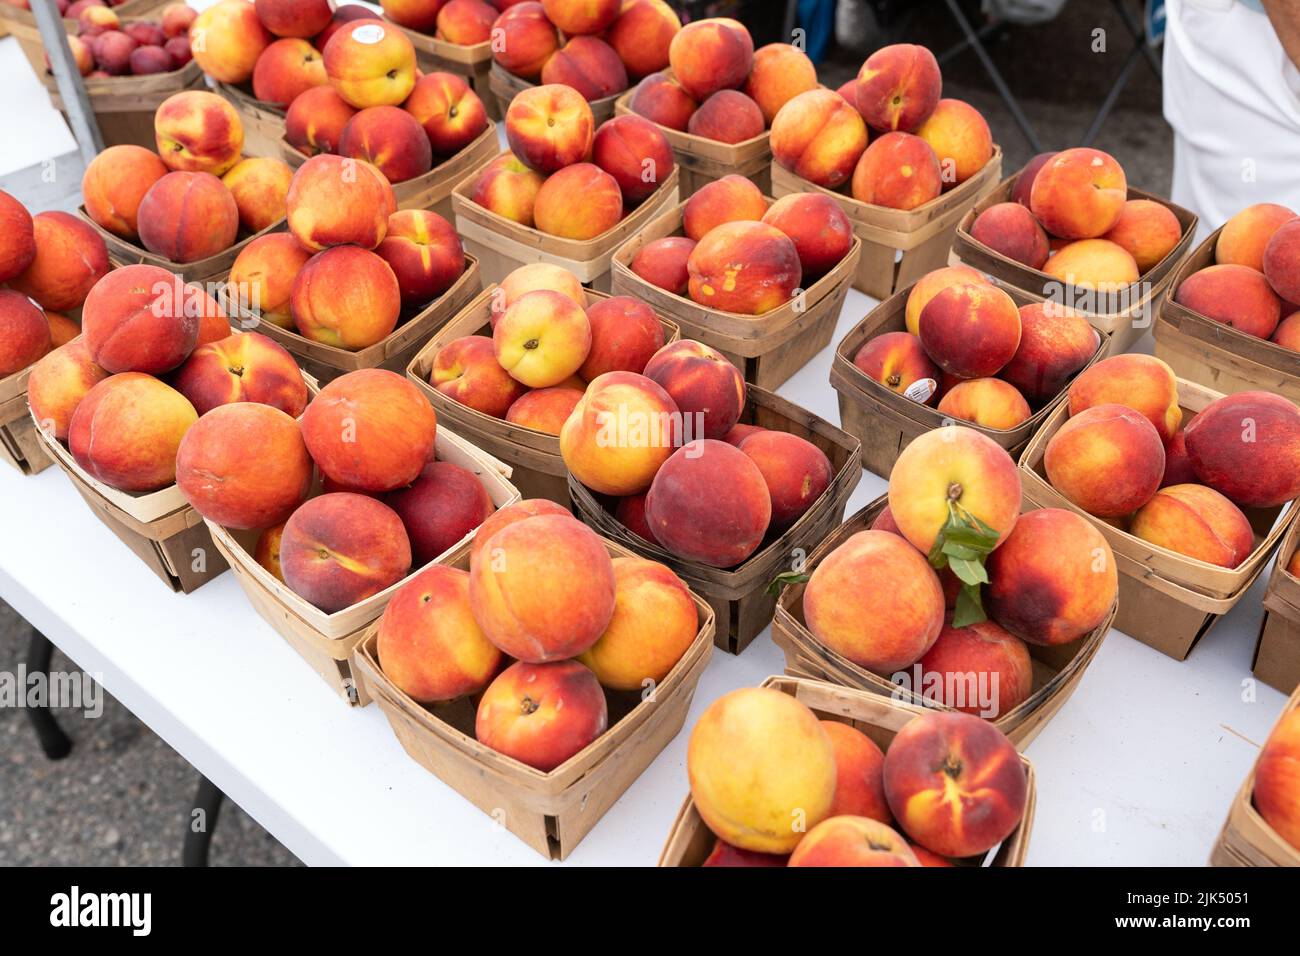 Fresh yellow peaches in cardboard crates at Farmers Market Stock Photo